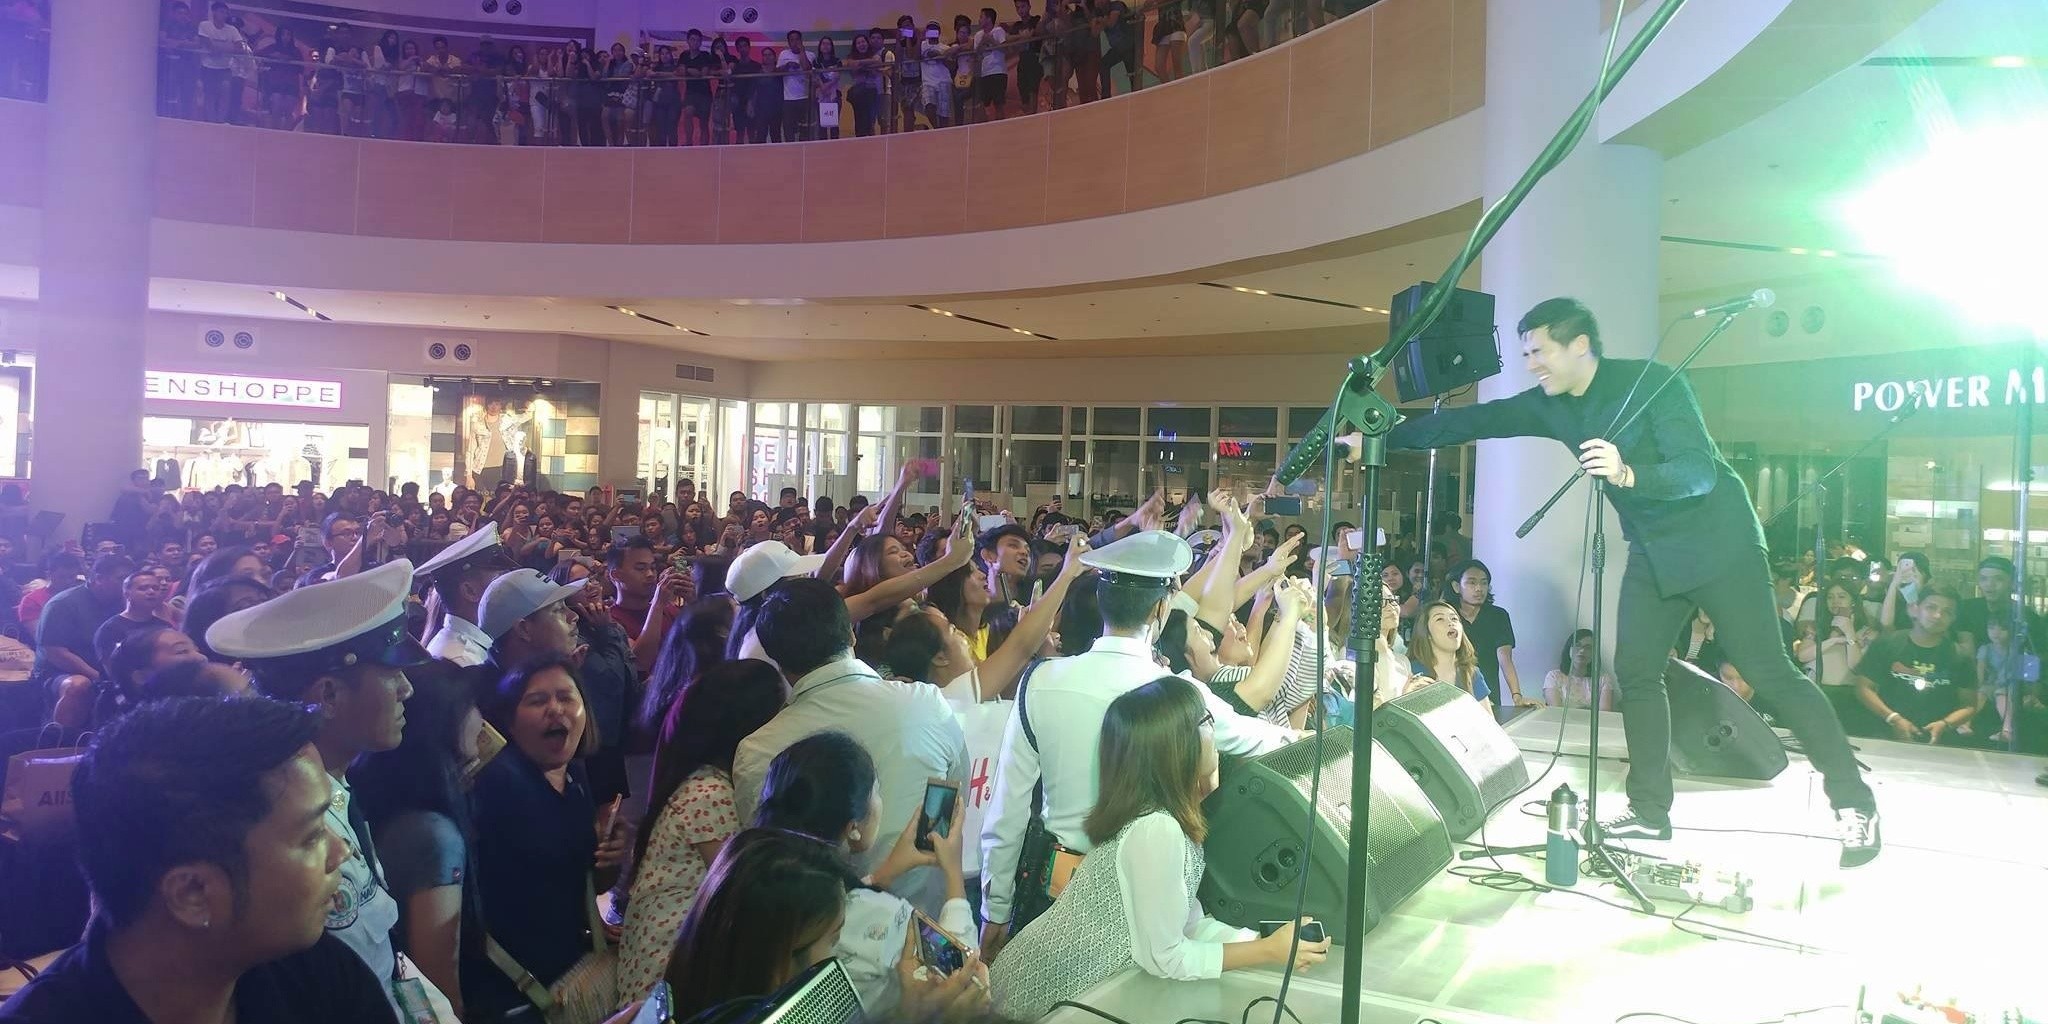 Hale takes us into the crazy fun world of Filipino mall shows